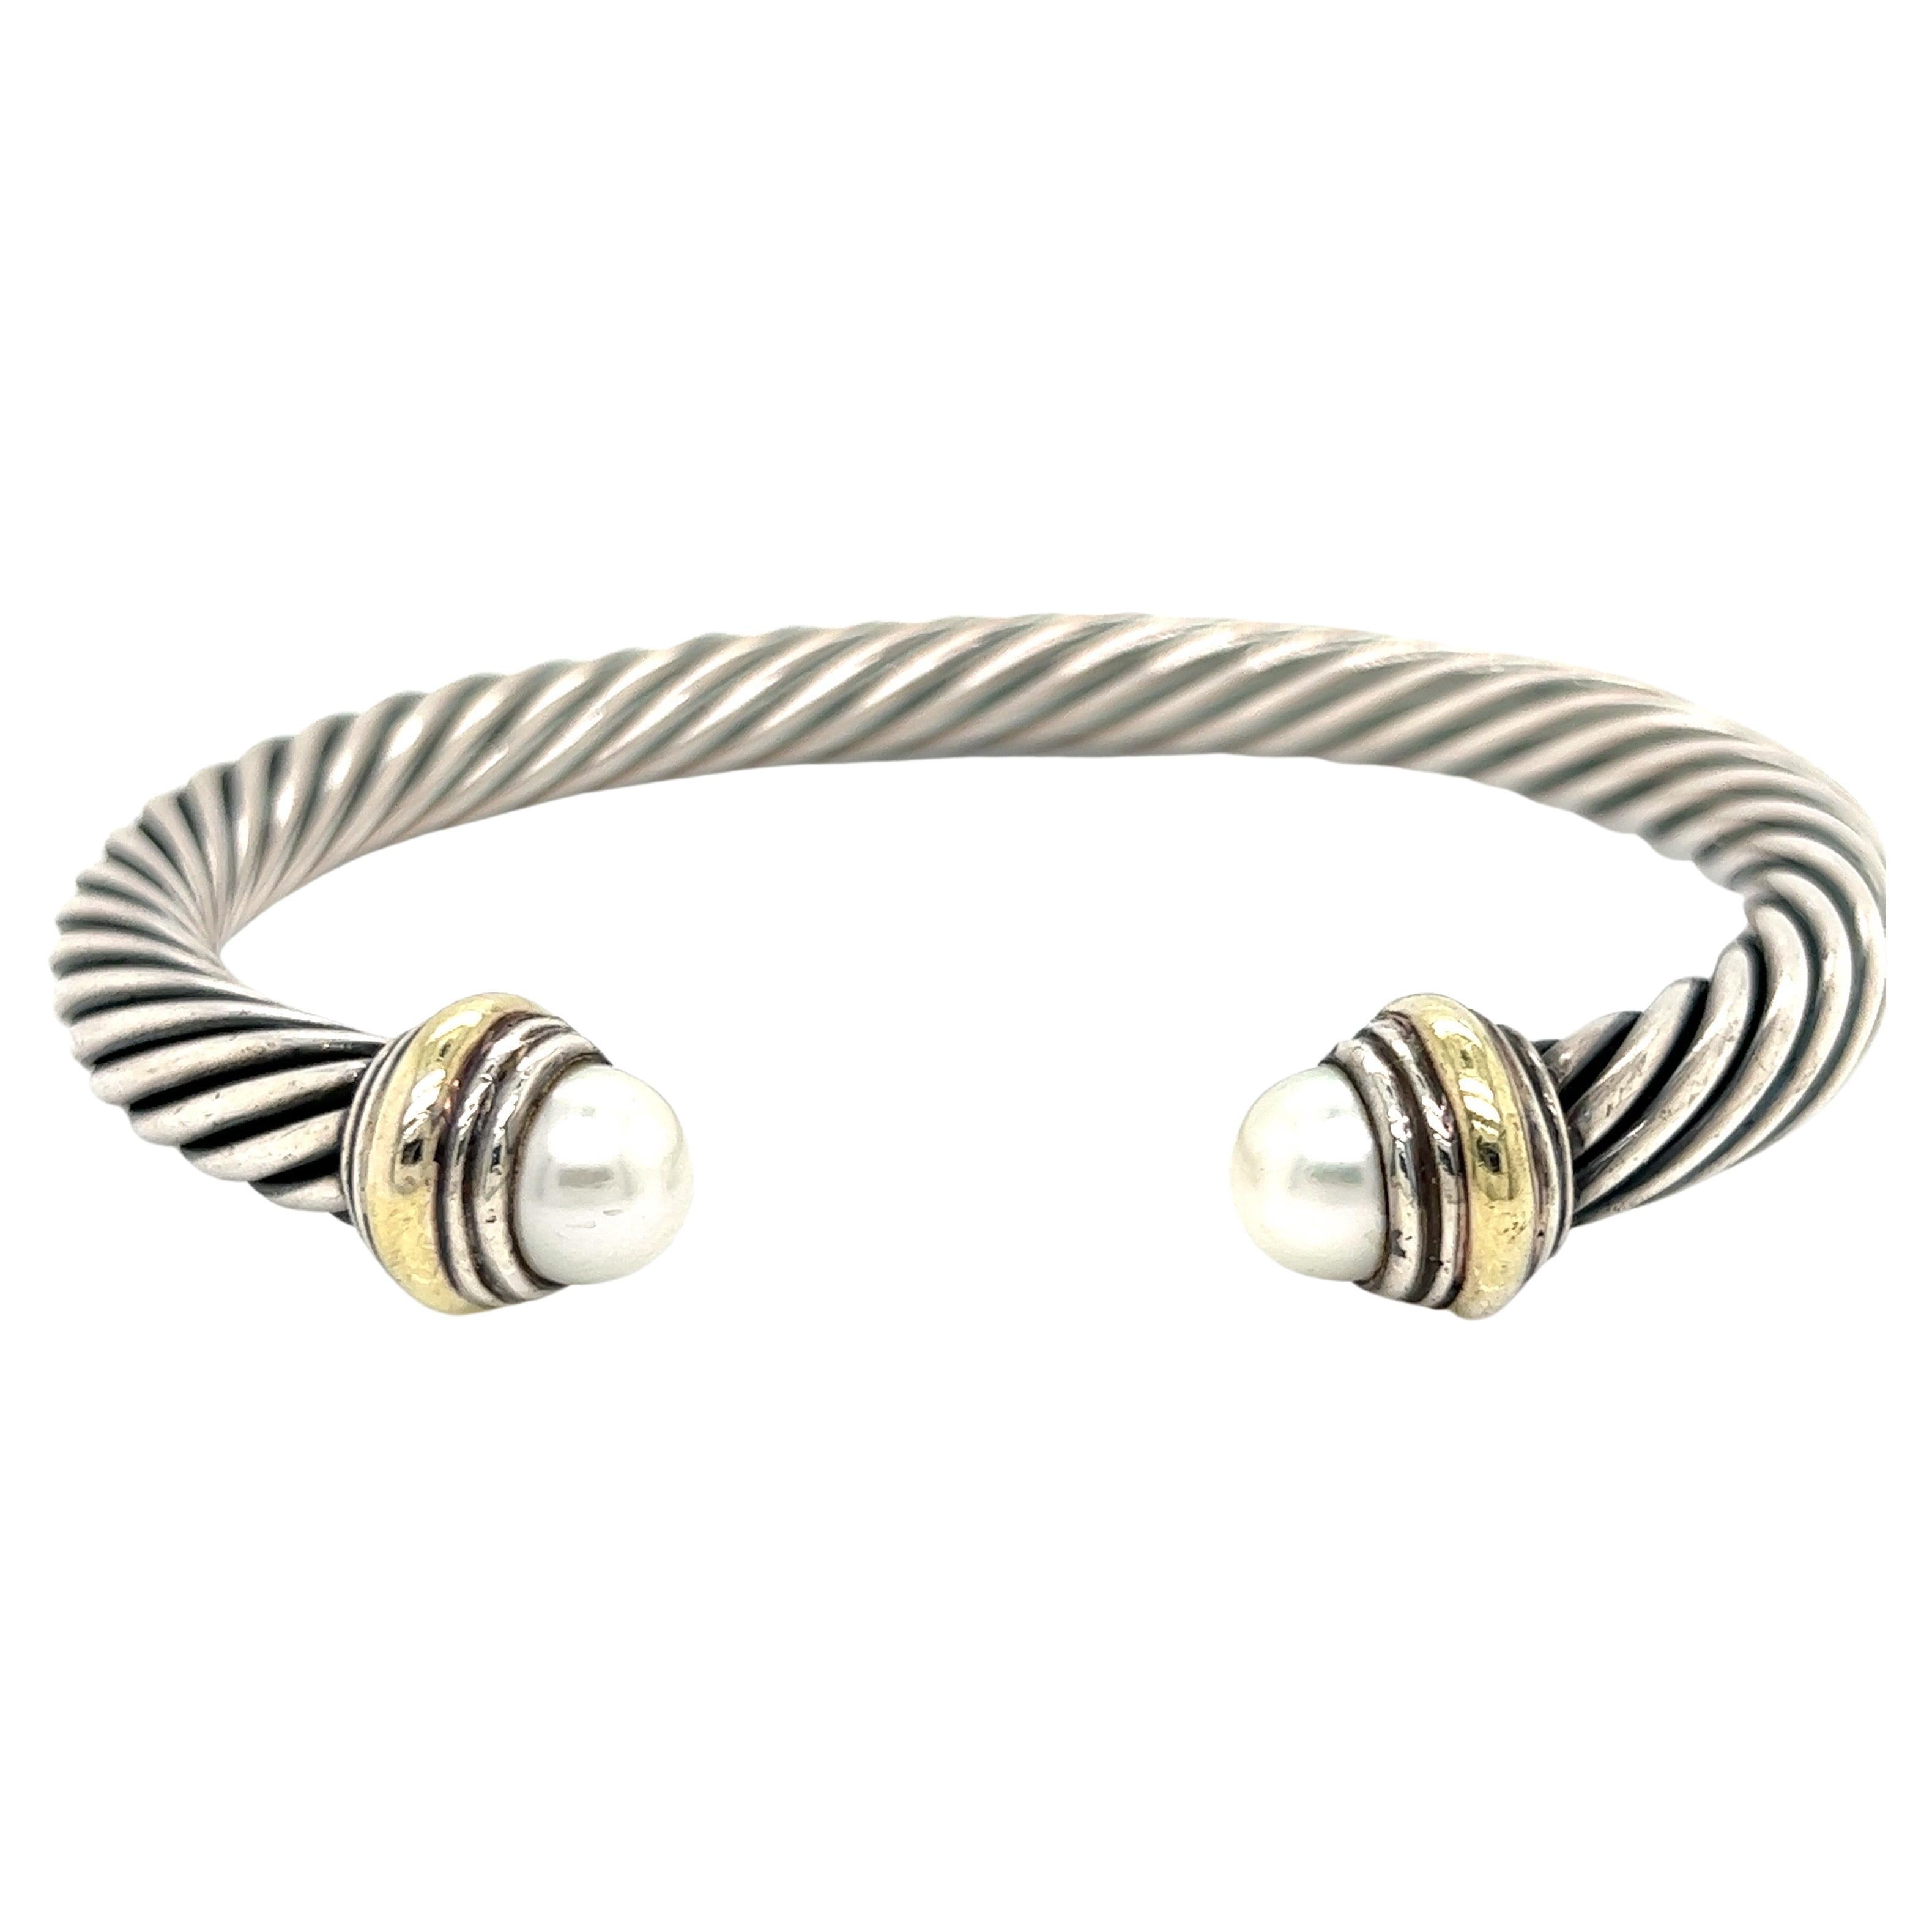 David Yurman 14k Yellow Gold, Silver and Pearl Cable Bracelet